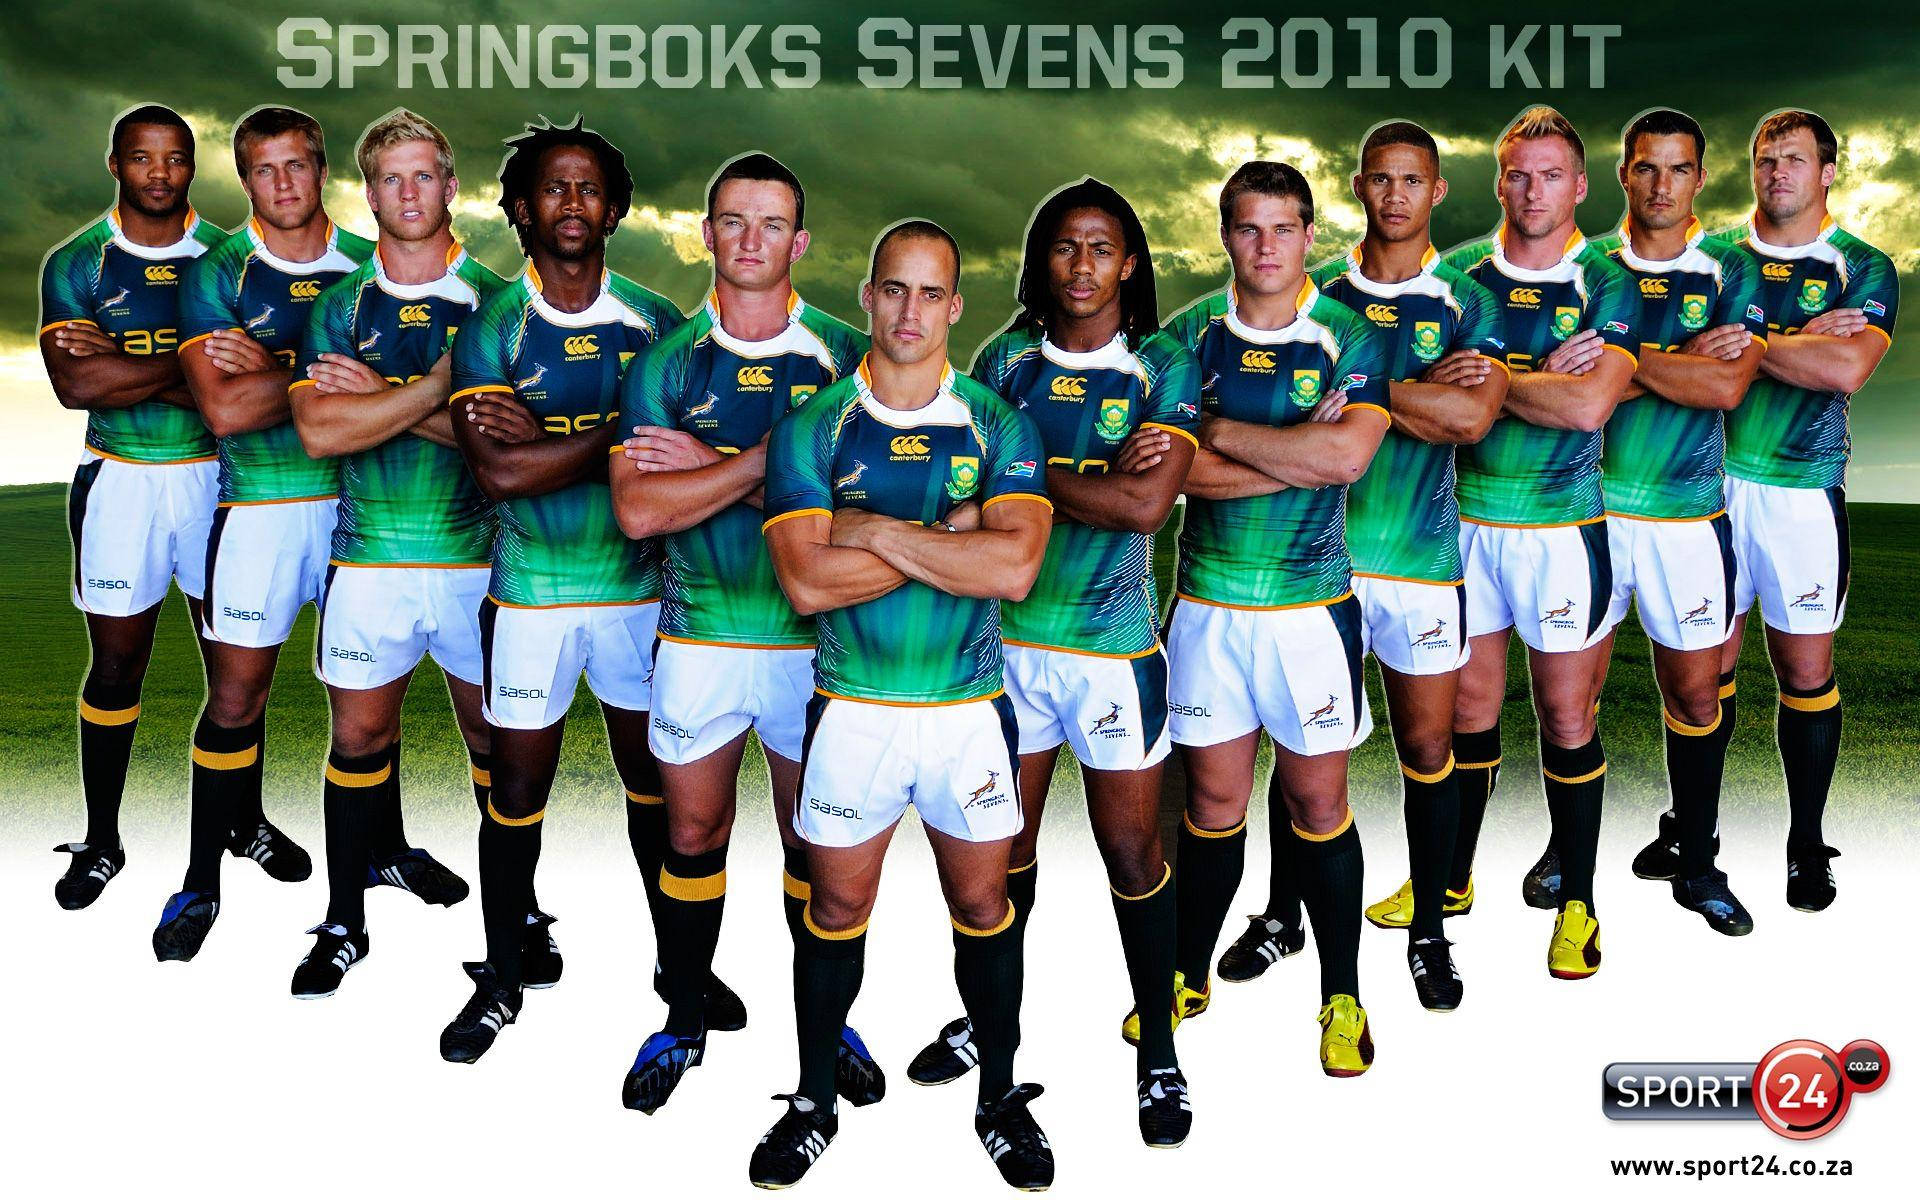 Players Of Springboks Rugby Showcasing Their 2010 Kit